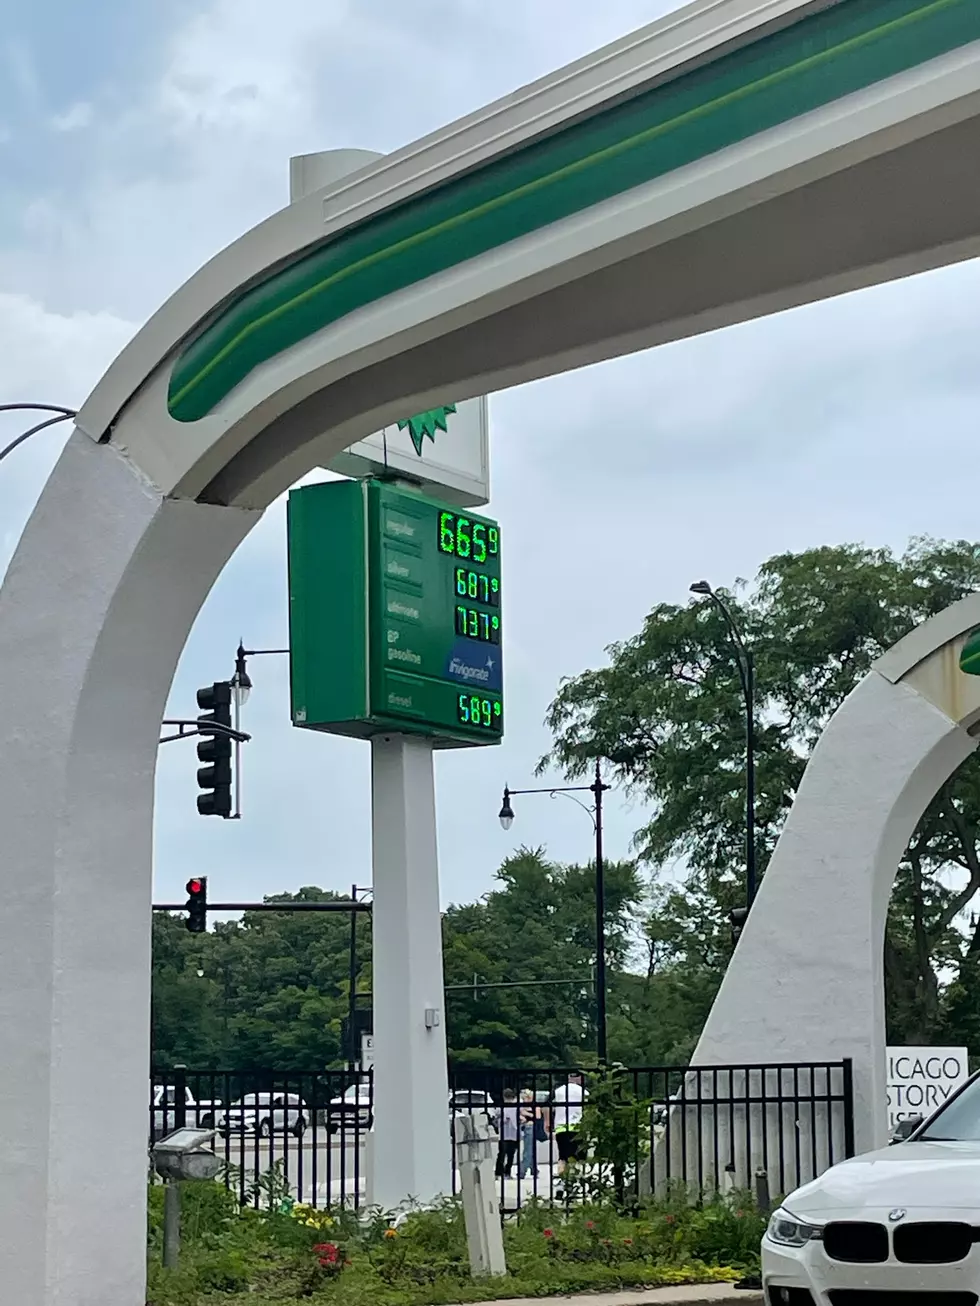 Are These Gas Prices From The Chicago Area, A Glimpse of the Future For Us?